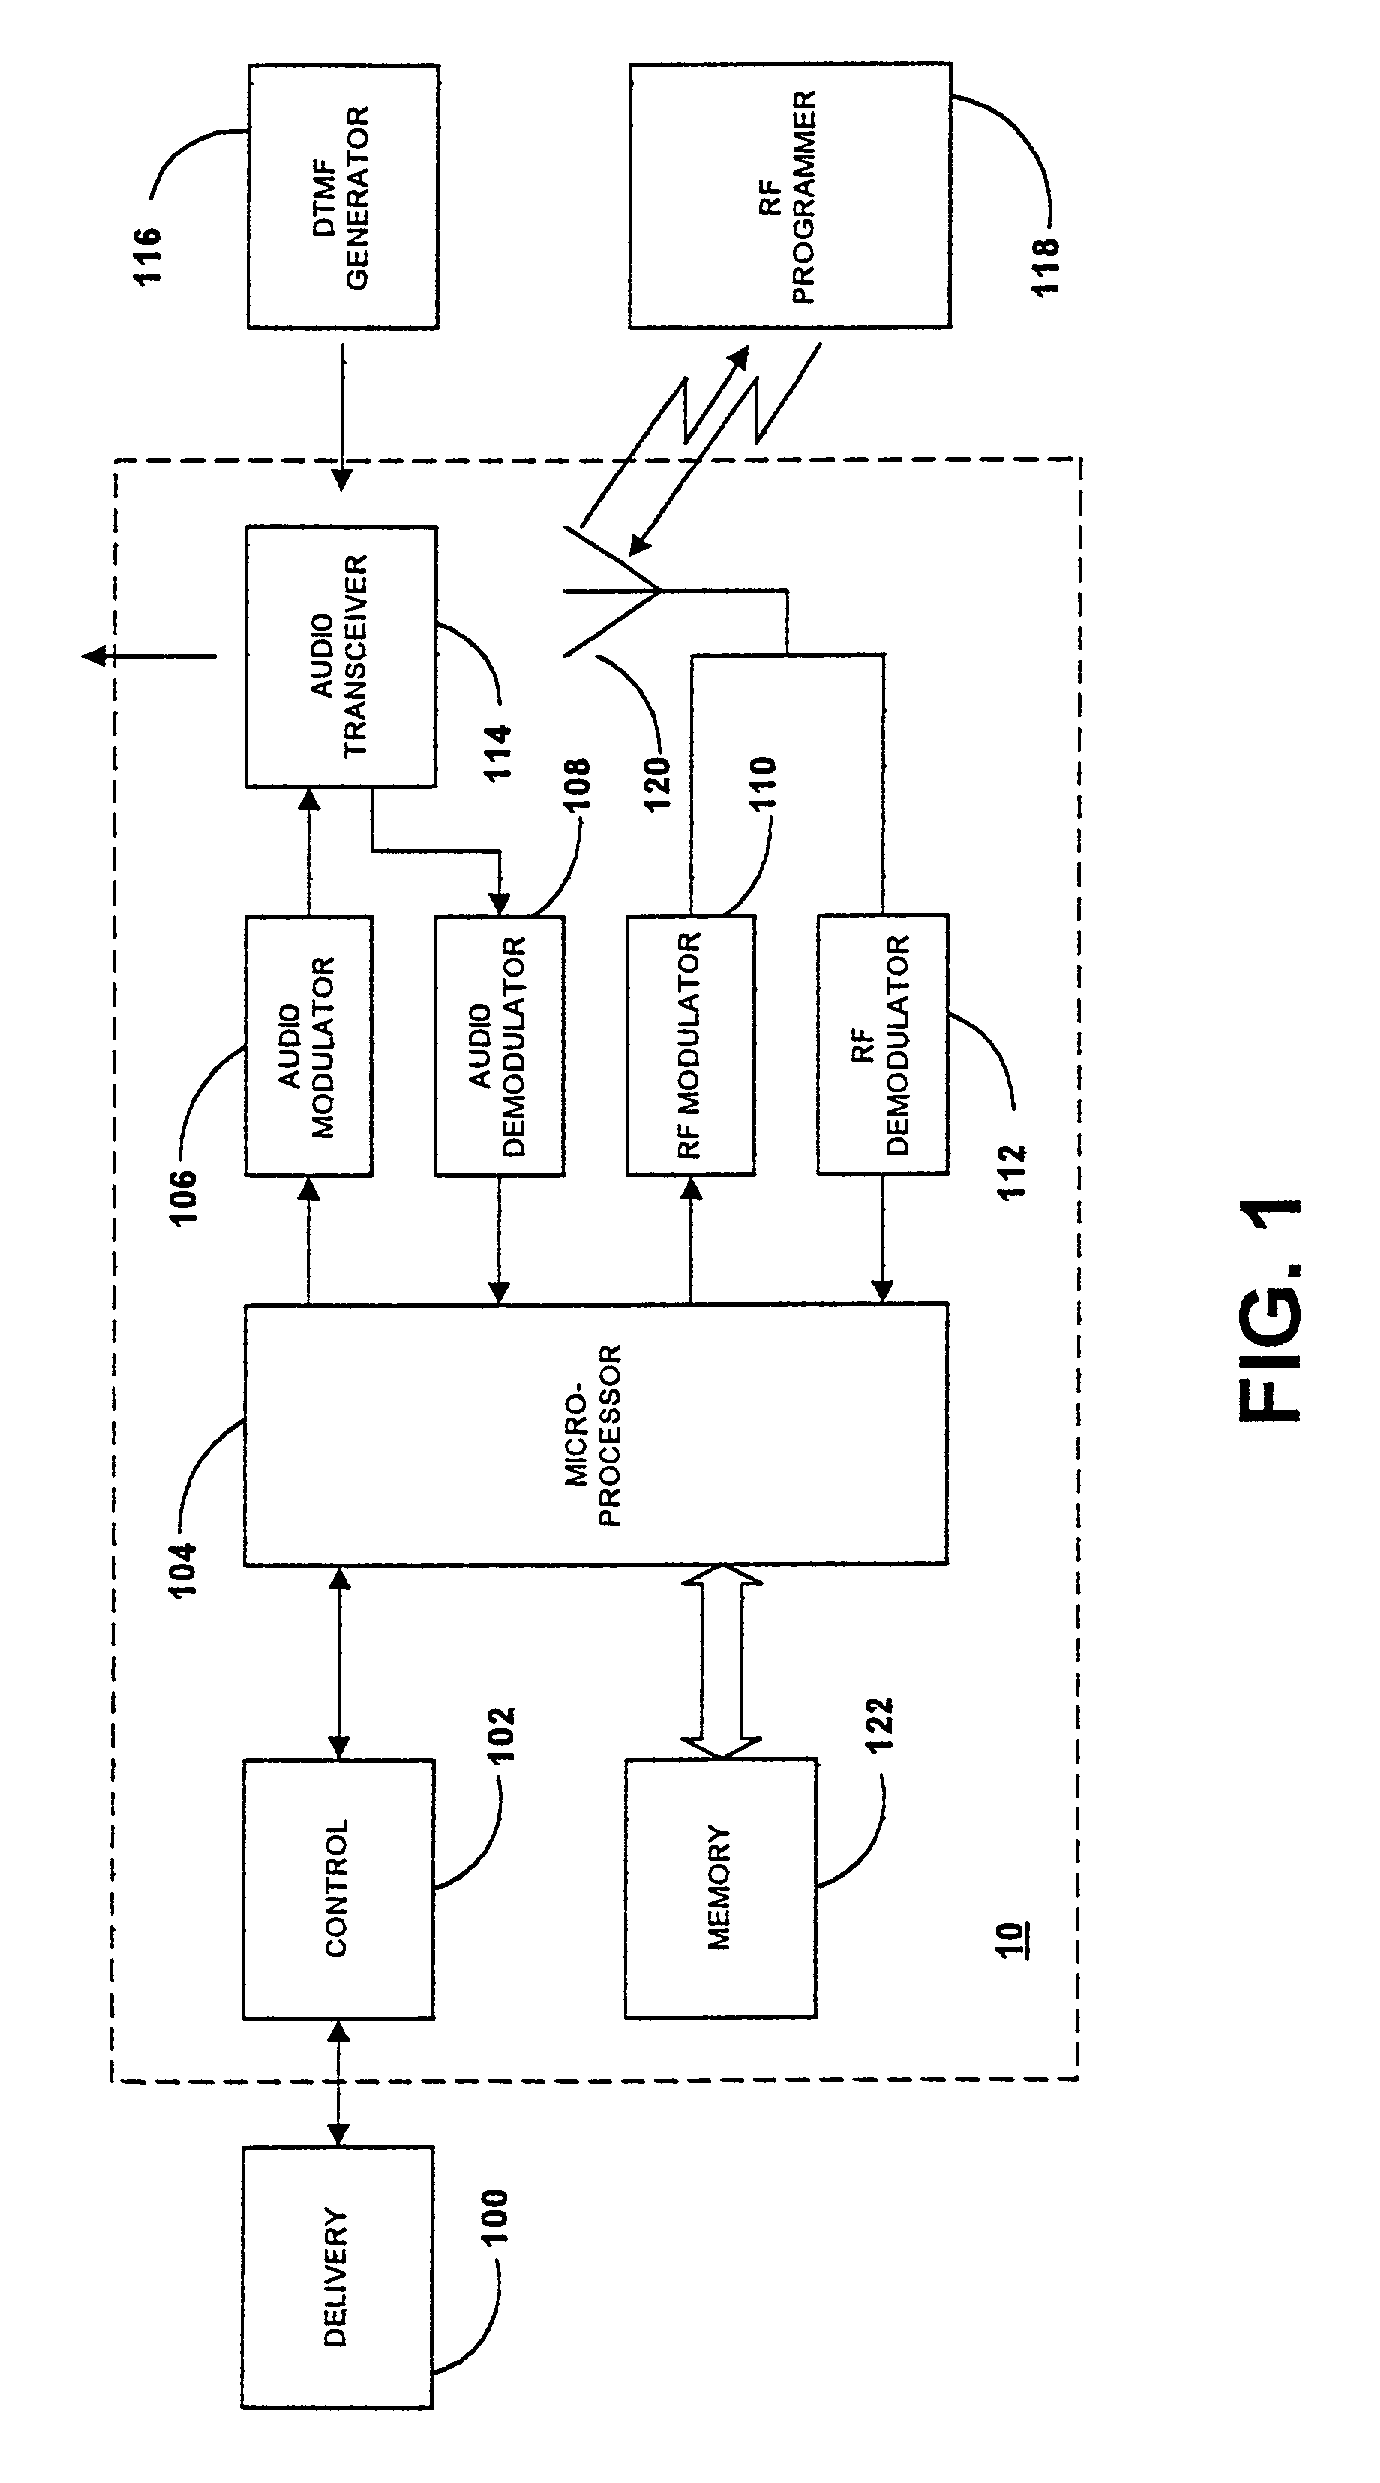 Method and apparatus for communicating with an implantable medical device